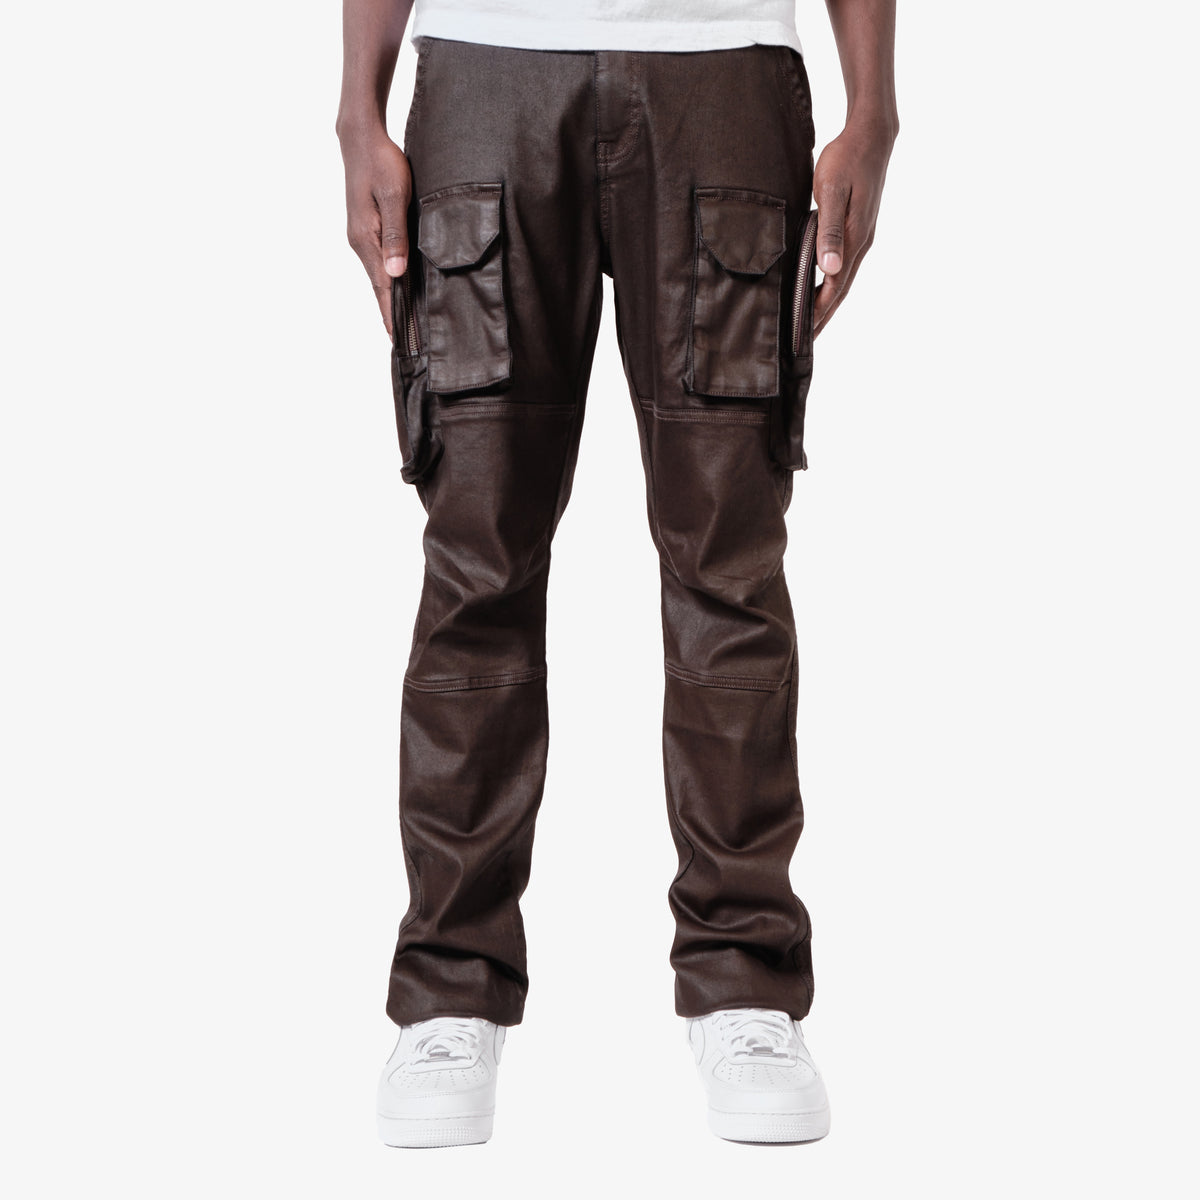 BROWN UTILITY CARGO WAX COATED JEANS